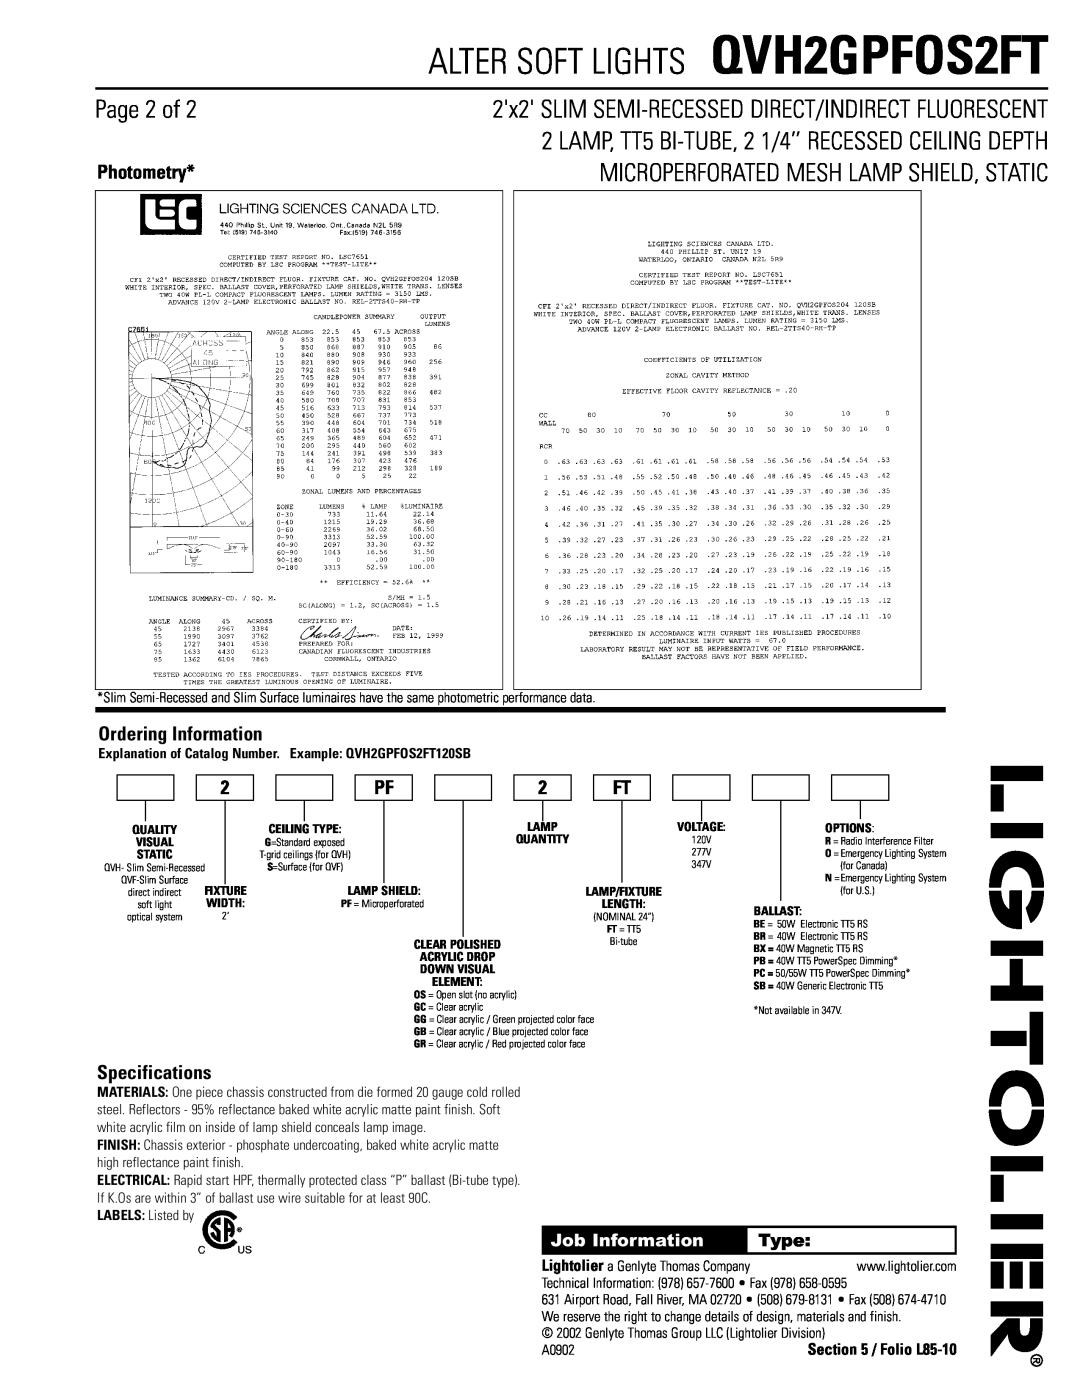 Lightolier QVH2GPFOS2FT Page 2 of, Microperforated Mesh Lamp Shield, Static, Photometry, Ordering Information, Type 